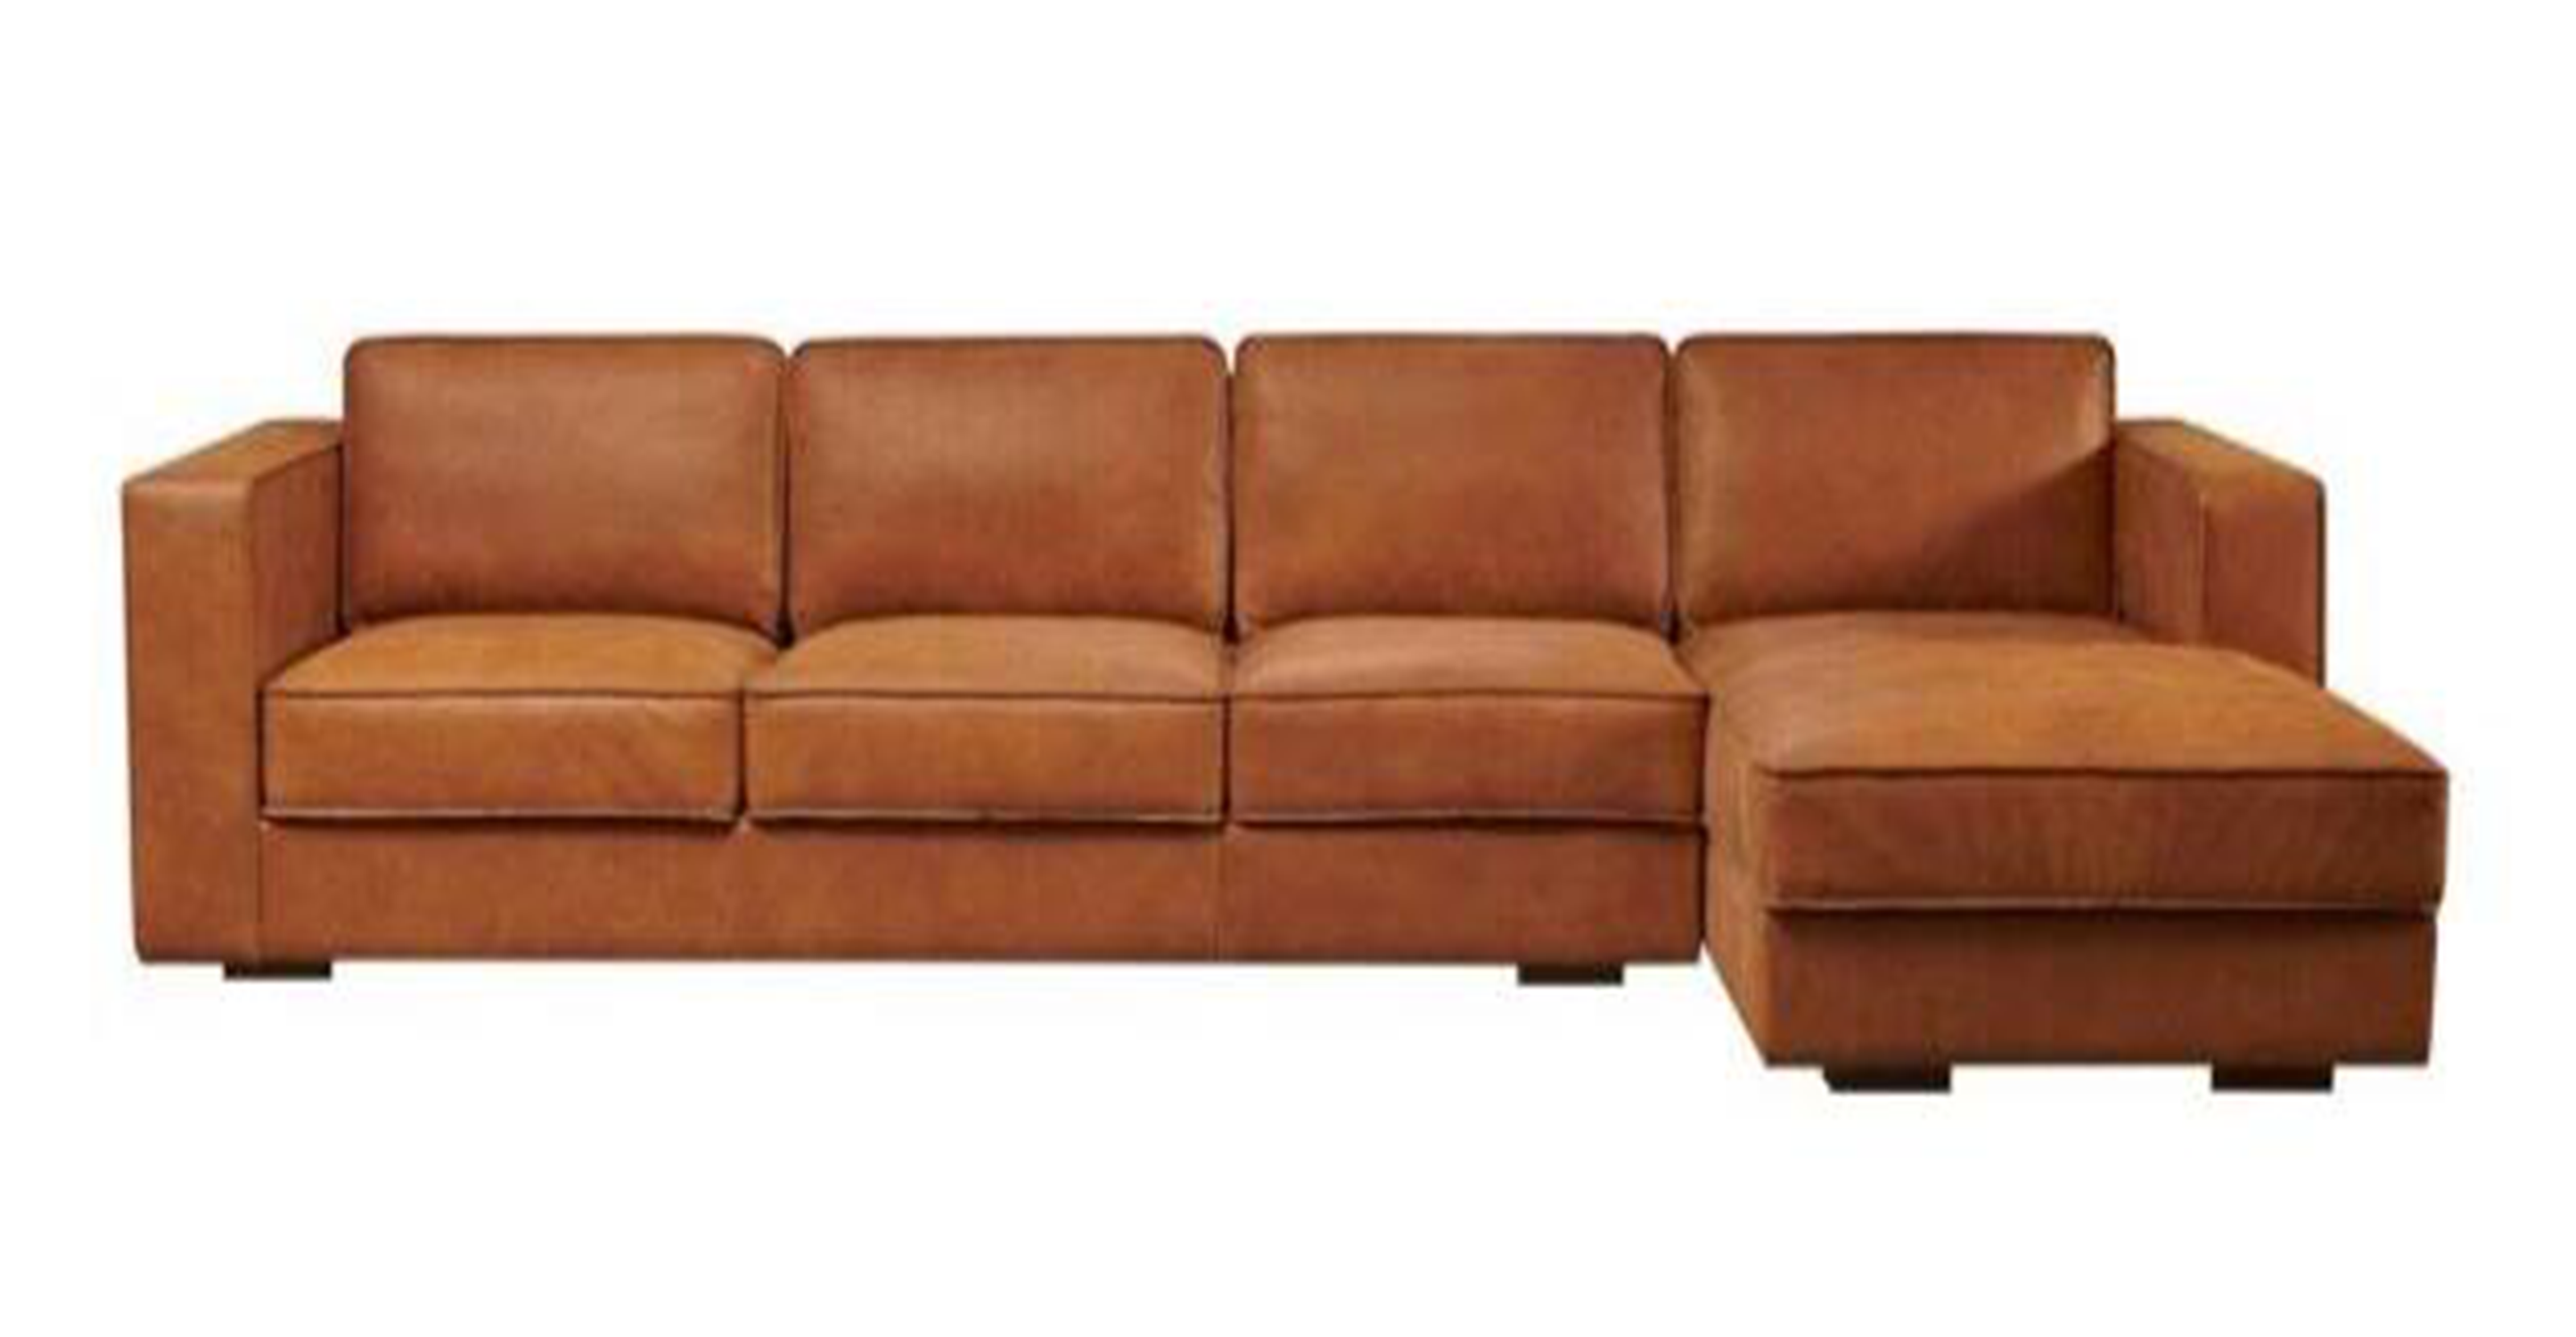 Big Sur Leather Sectional